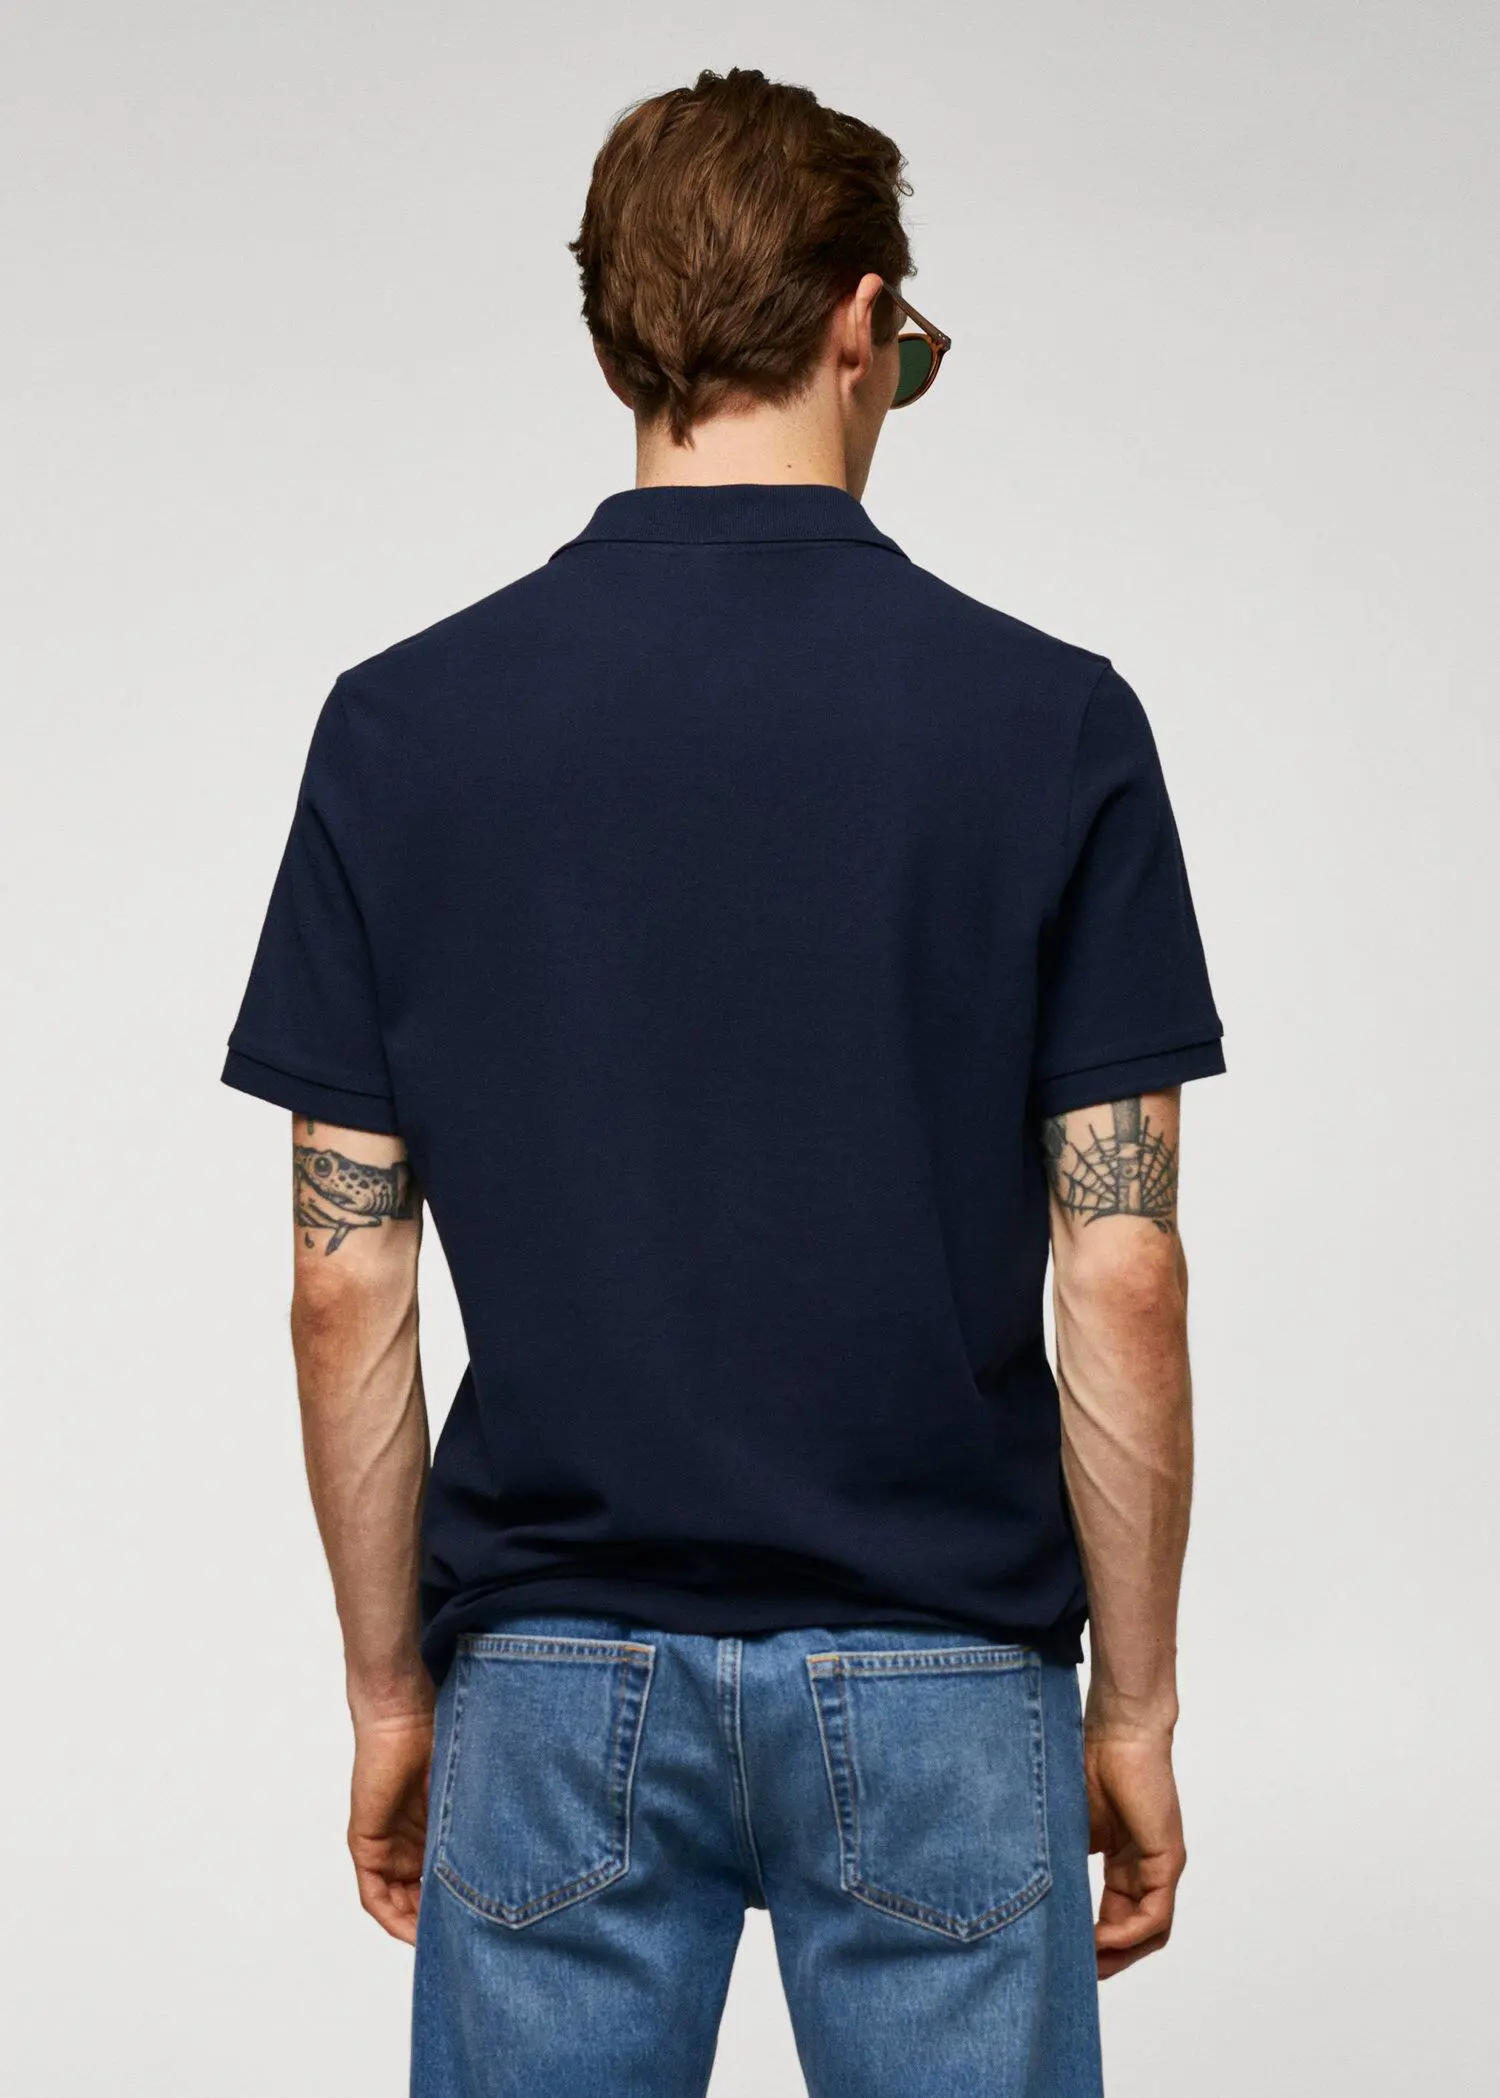 Mango 100% cotton pique polo shirt. a man with tattoos on his arms wearing jeans. 